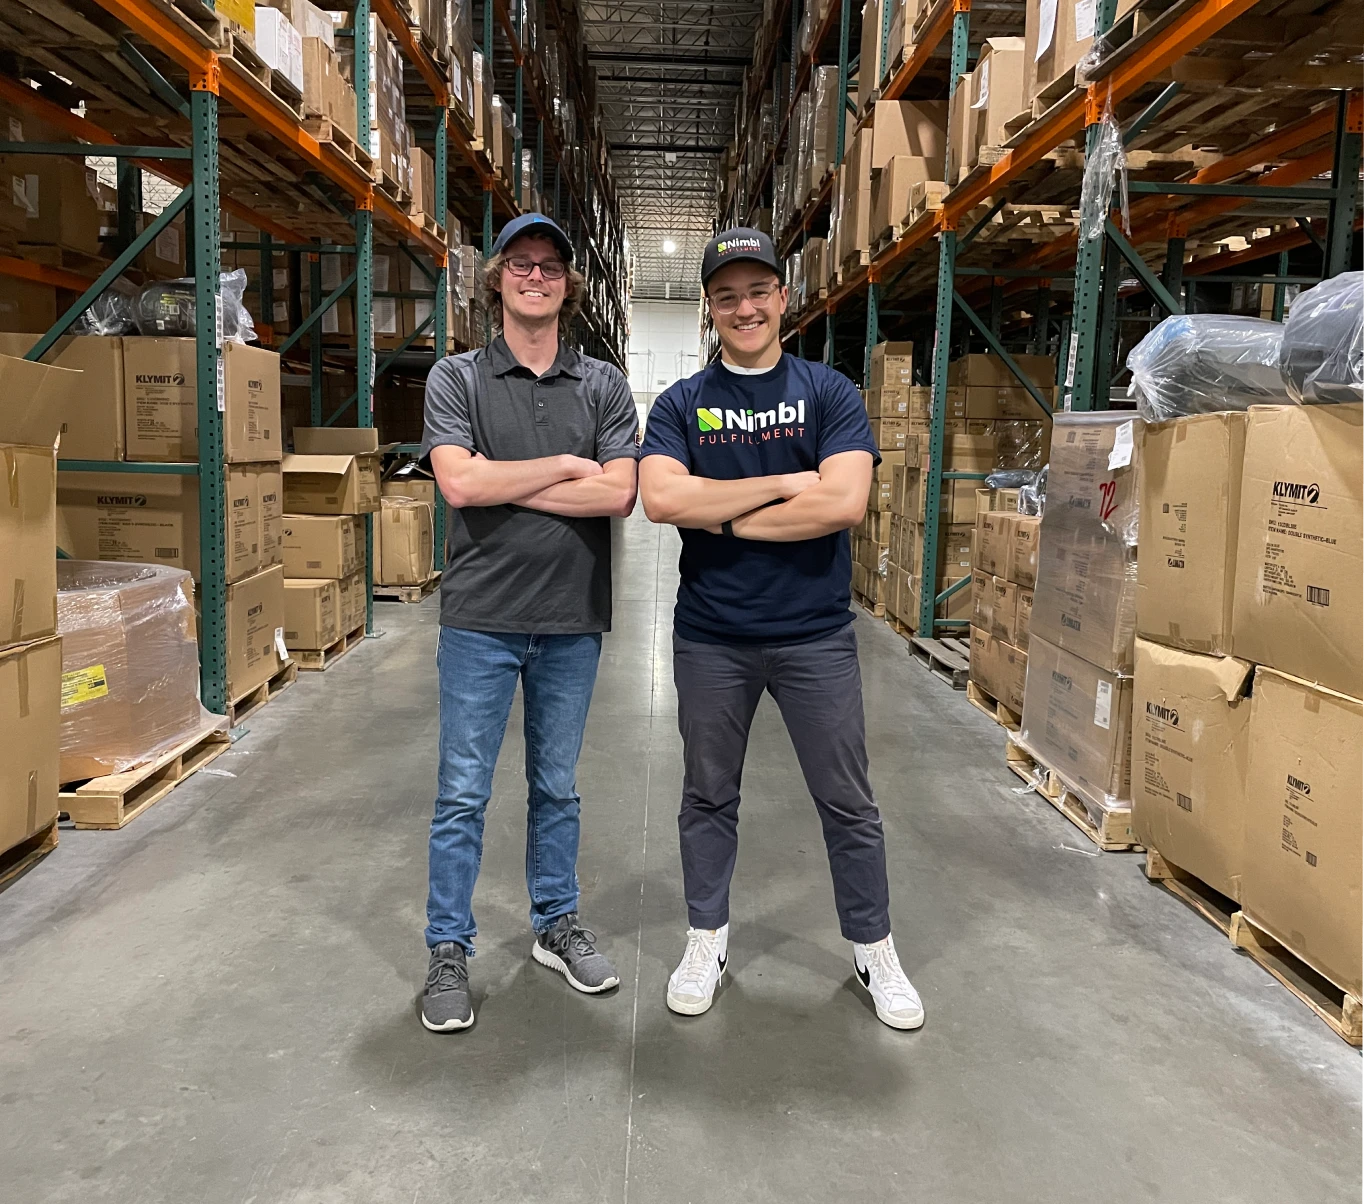 Two people in a warehouse, smiling at the camera